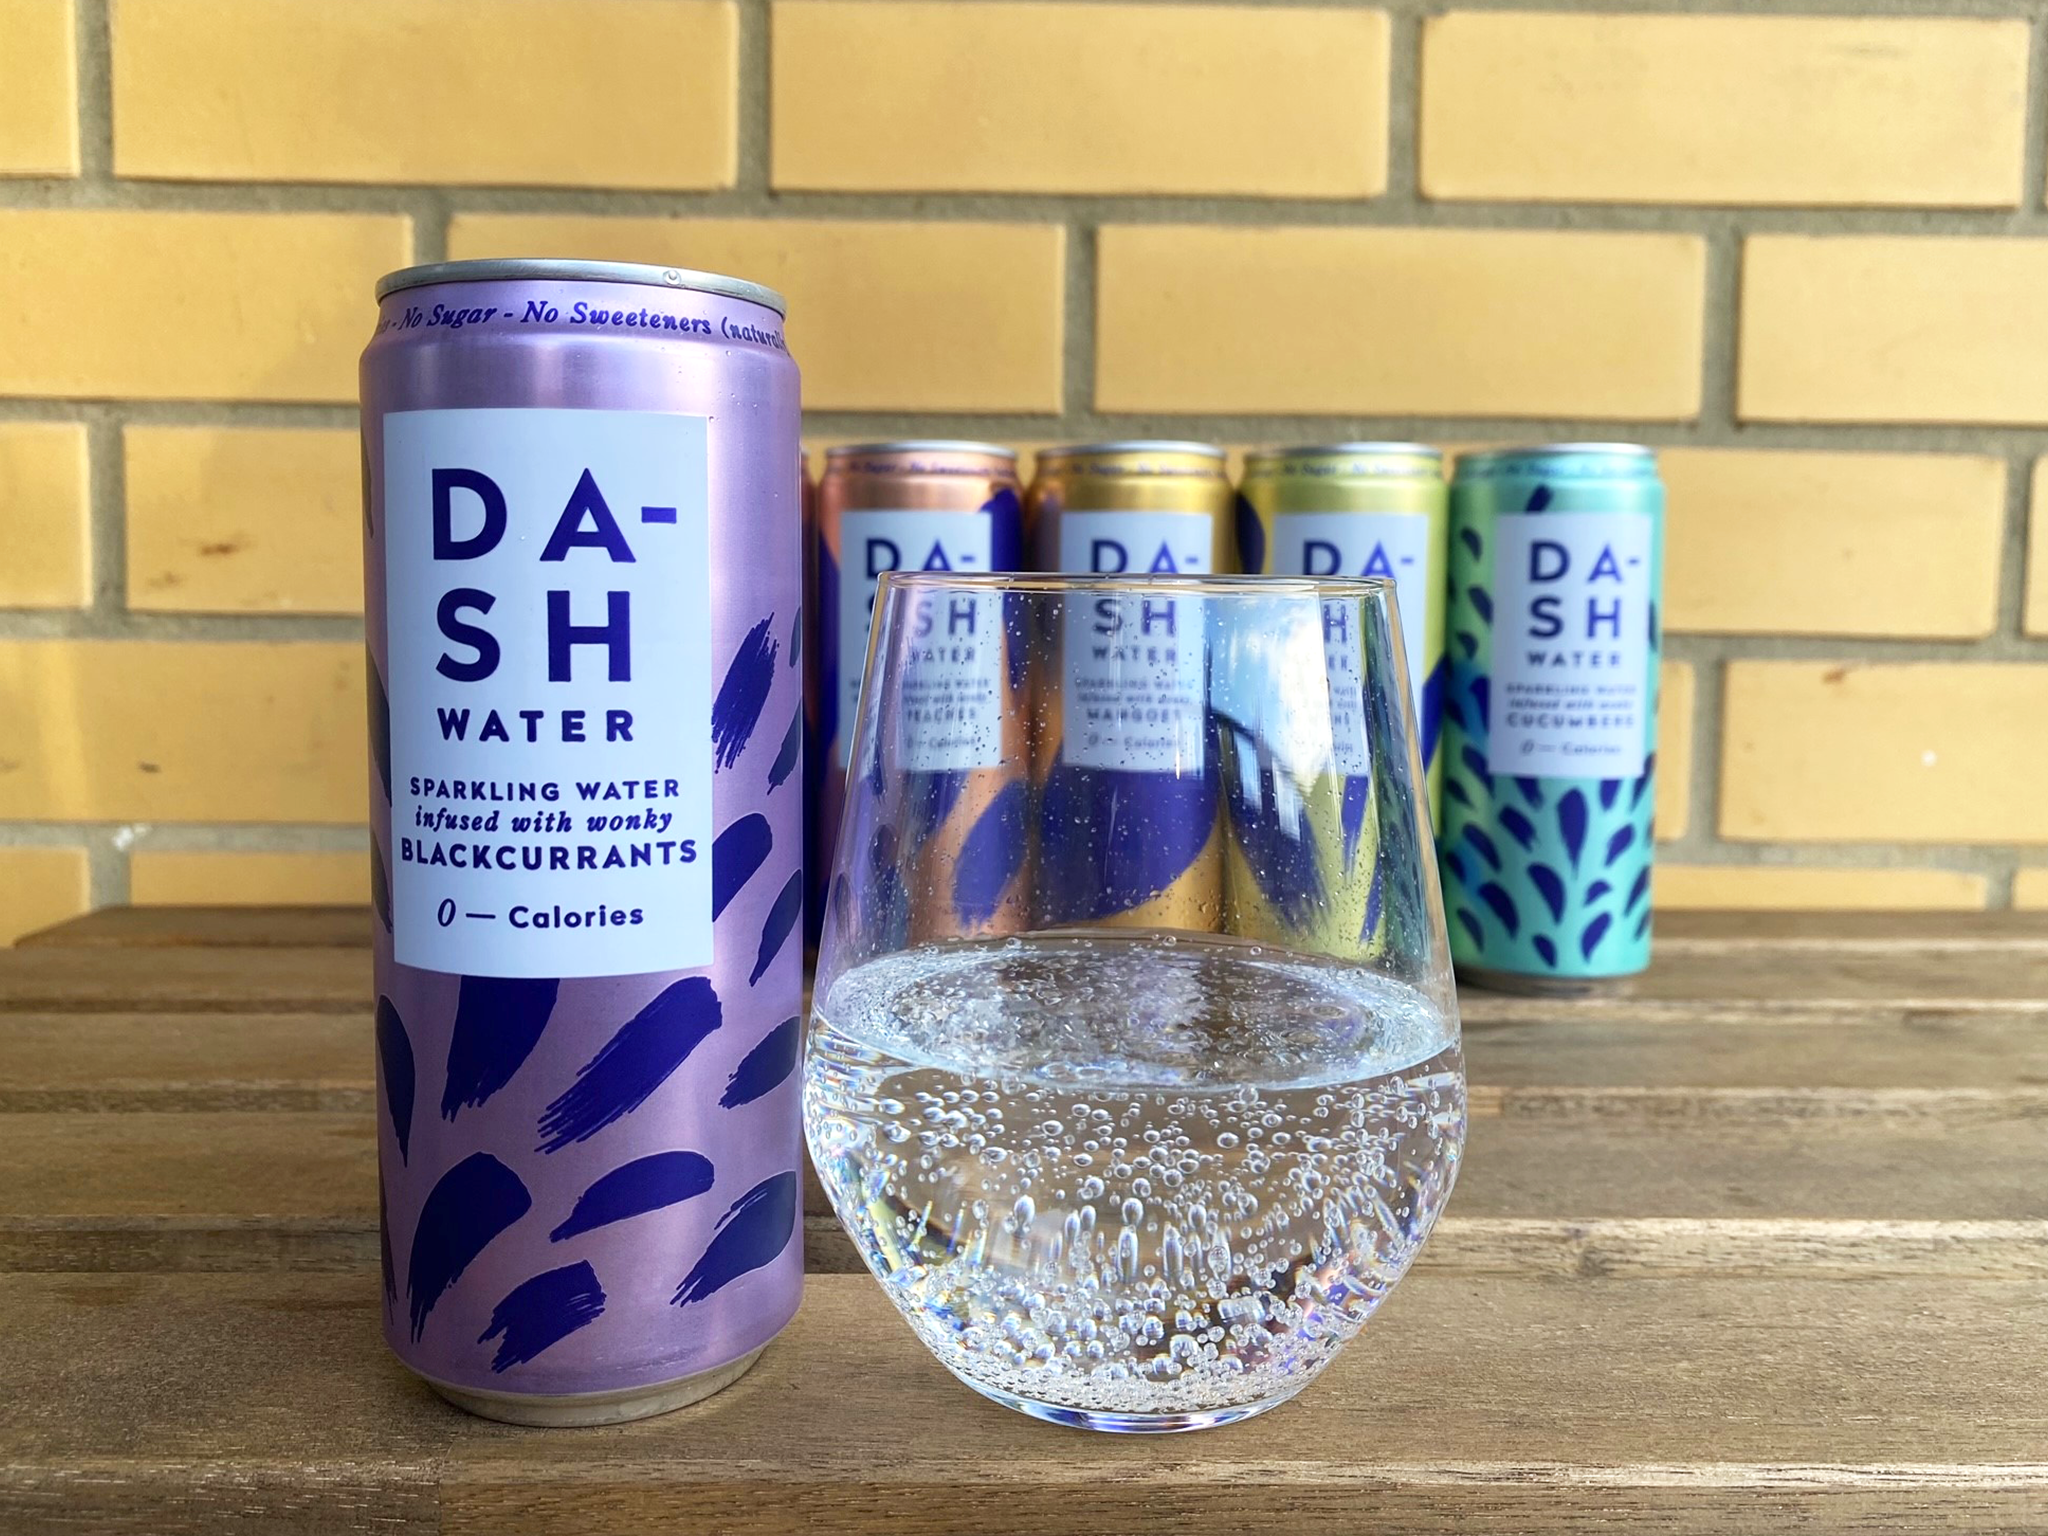 Dash water review: Blackberry, lemon and more flavours